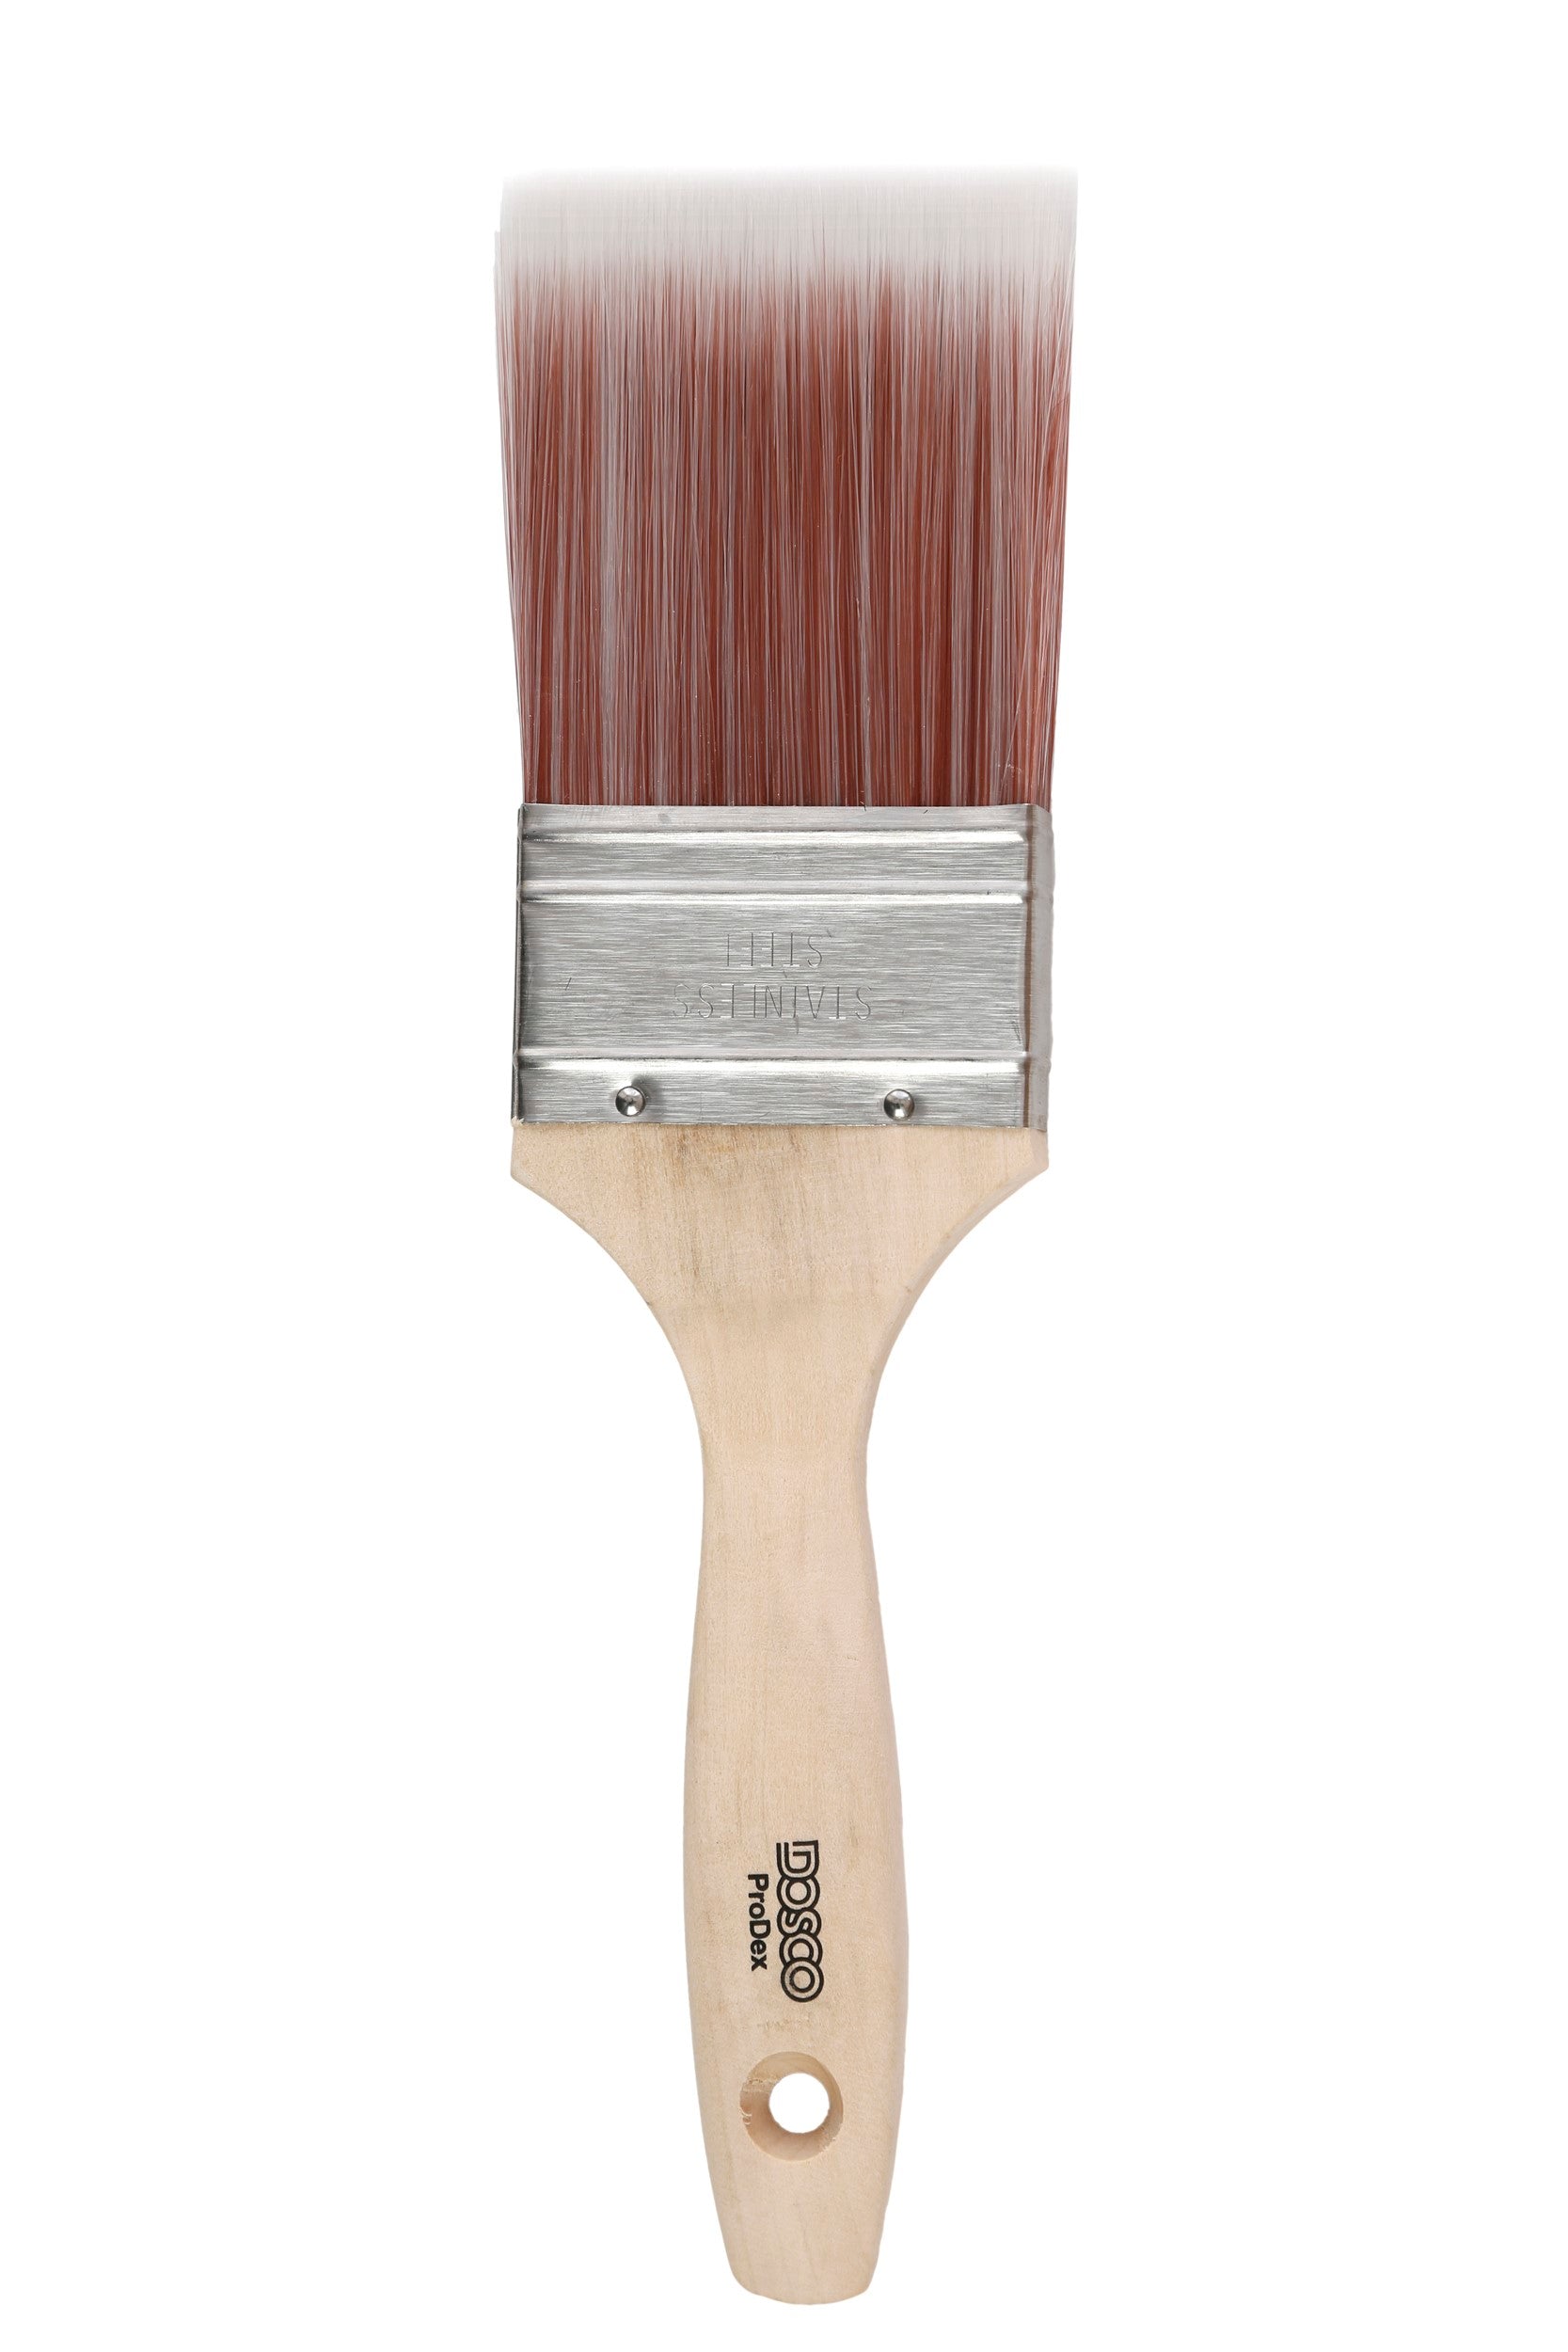 Paint & Decorating | DOSCO Pro-Dex Synthetic Paint Brush 3 inch by Weirs of Baggot St